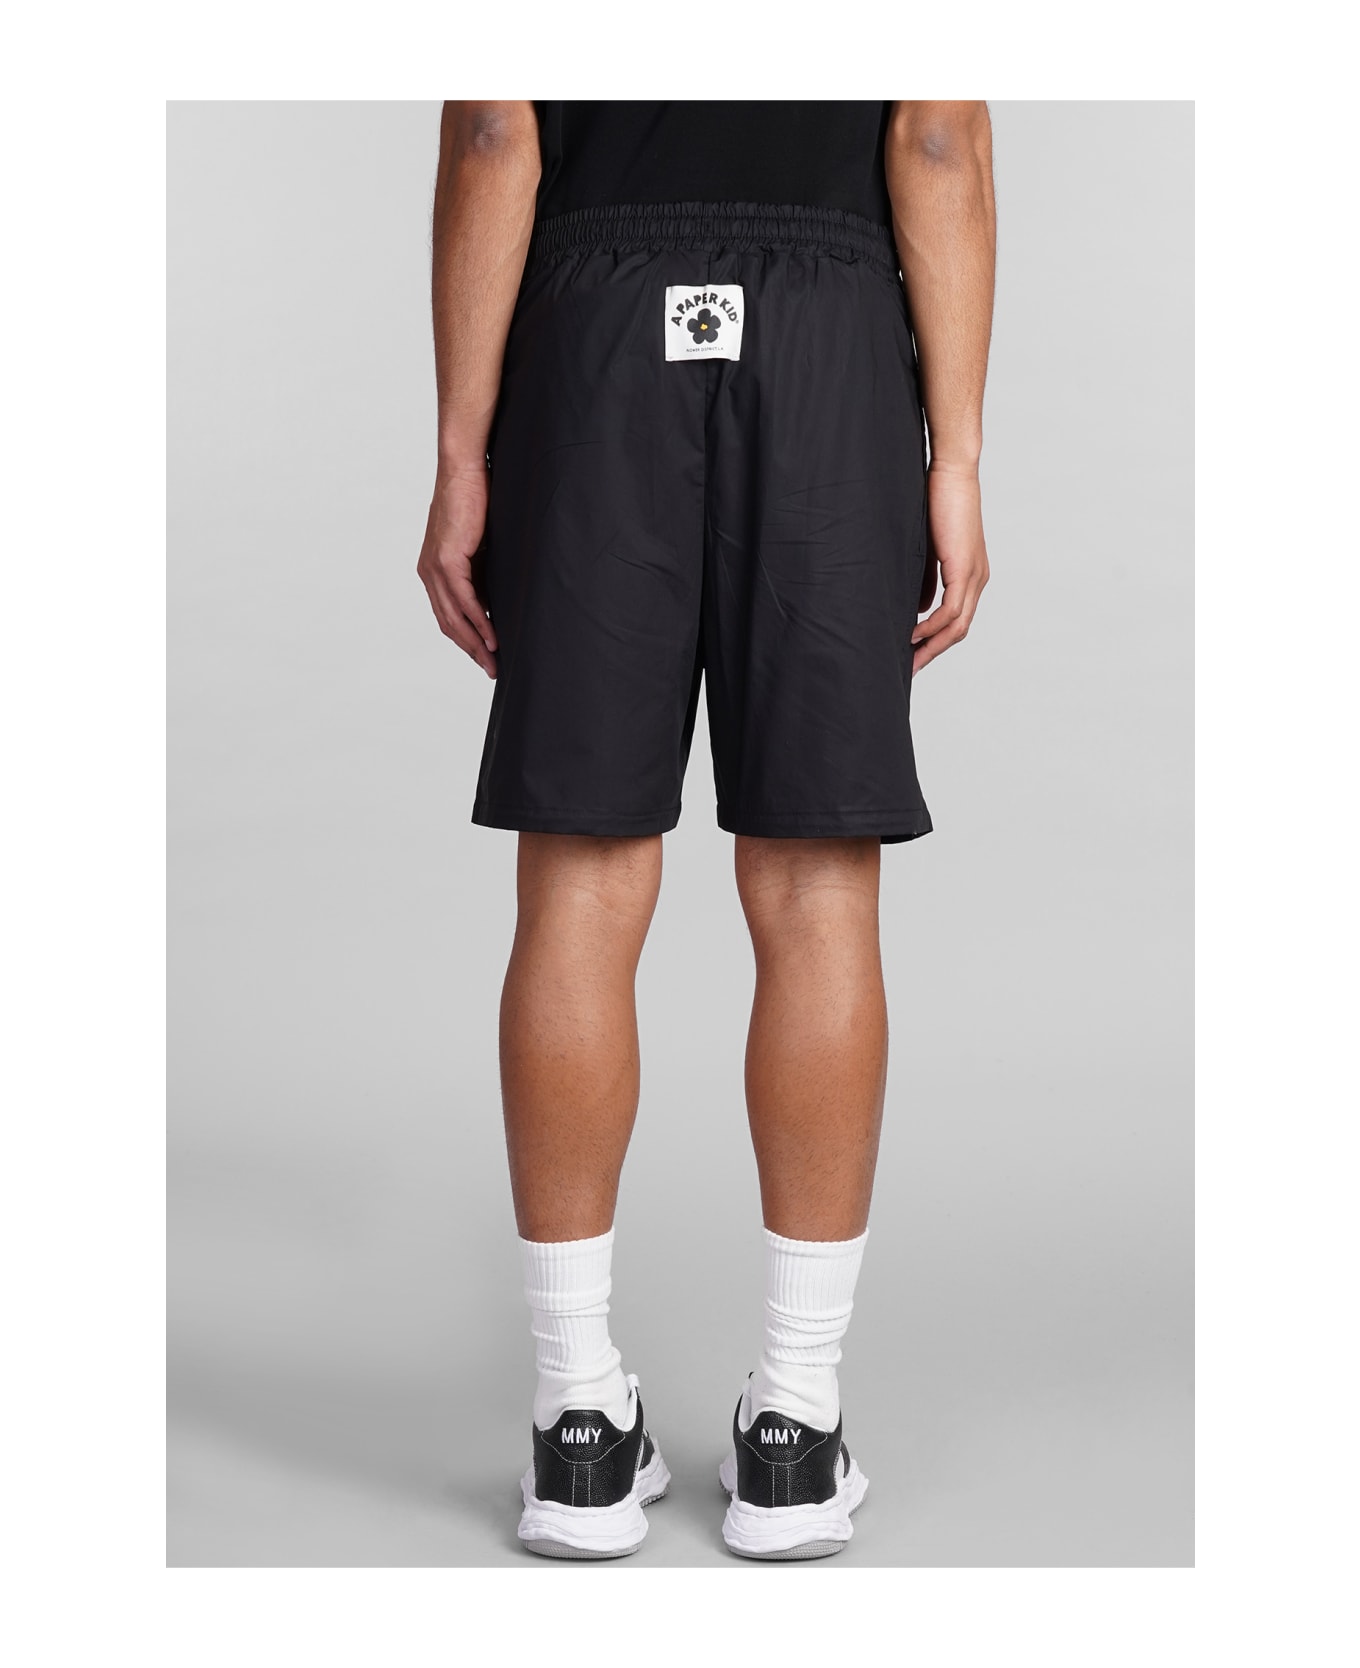 A Paper Kid Shorts In Black Cotton - black